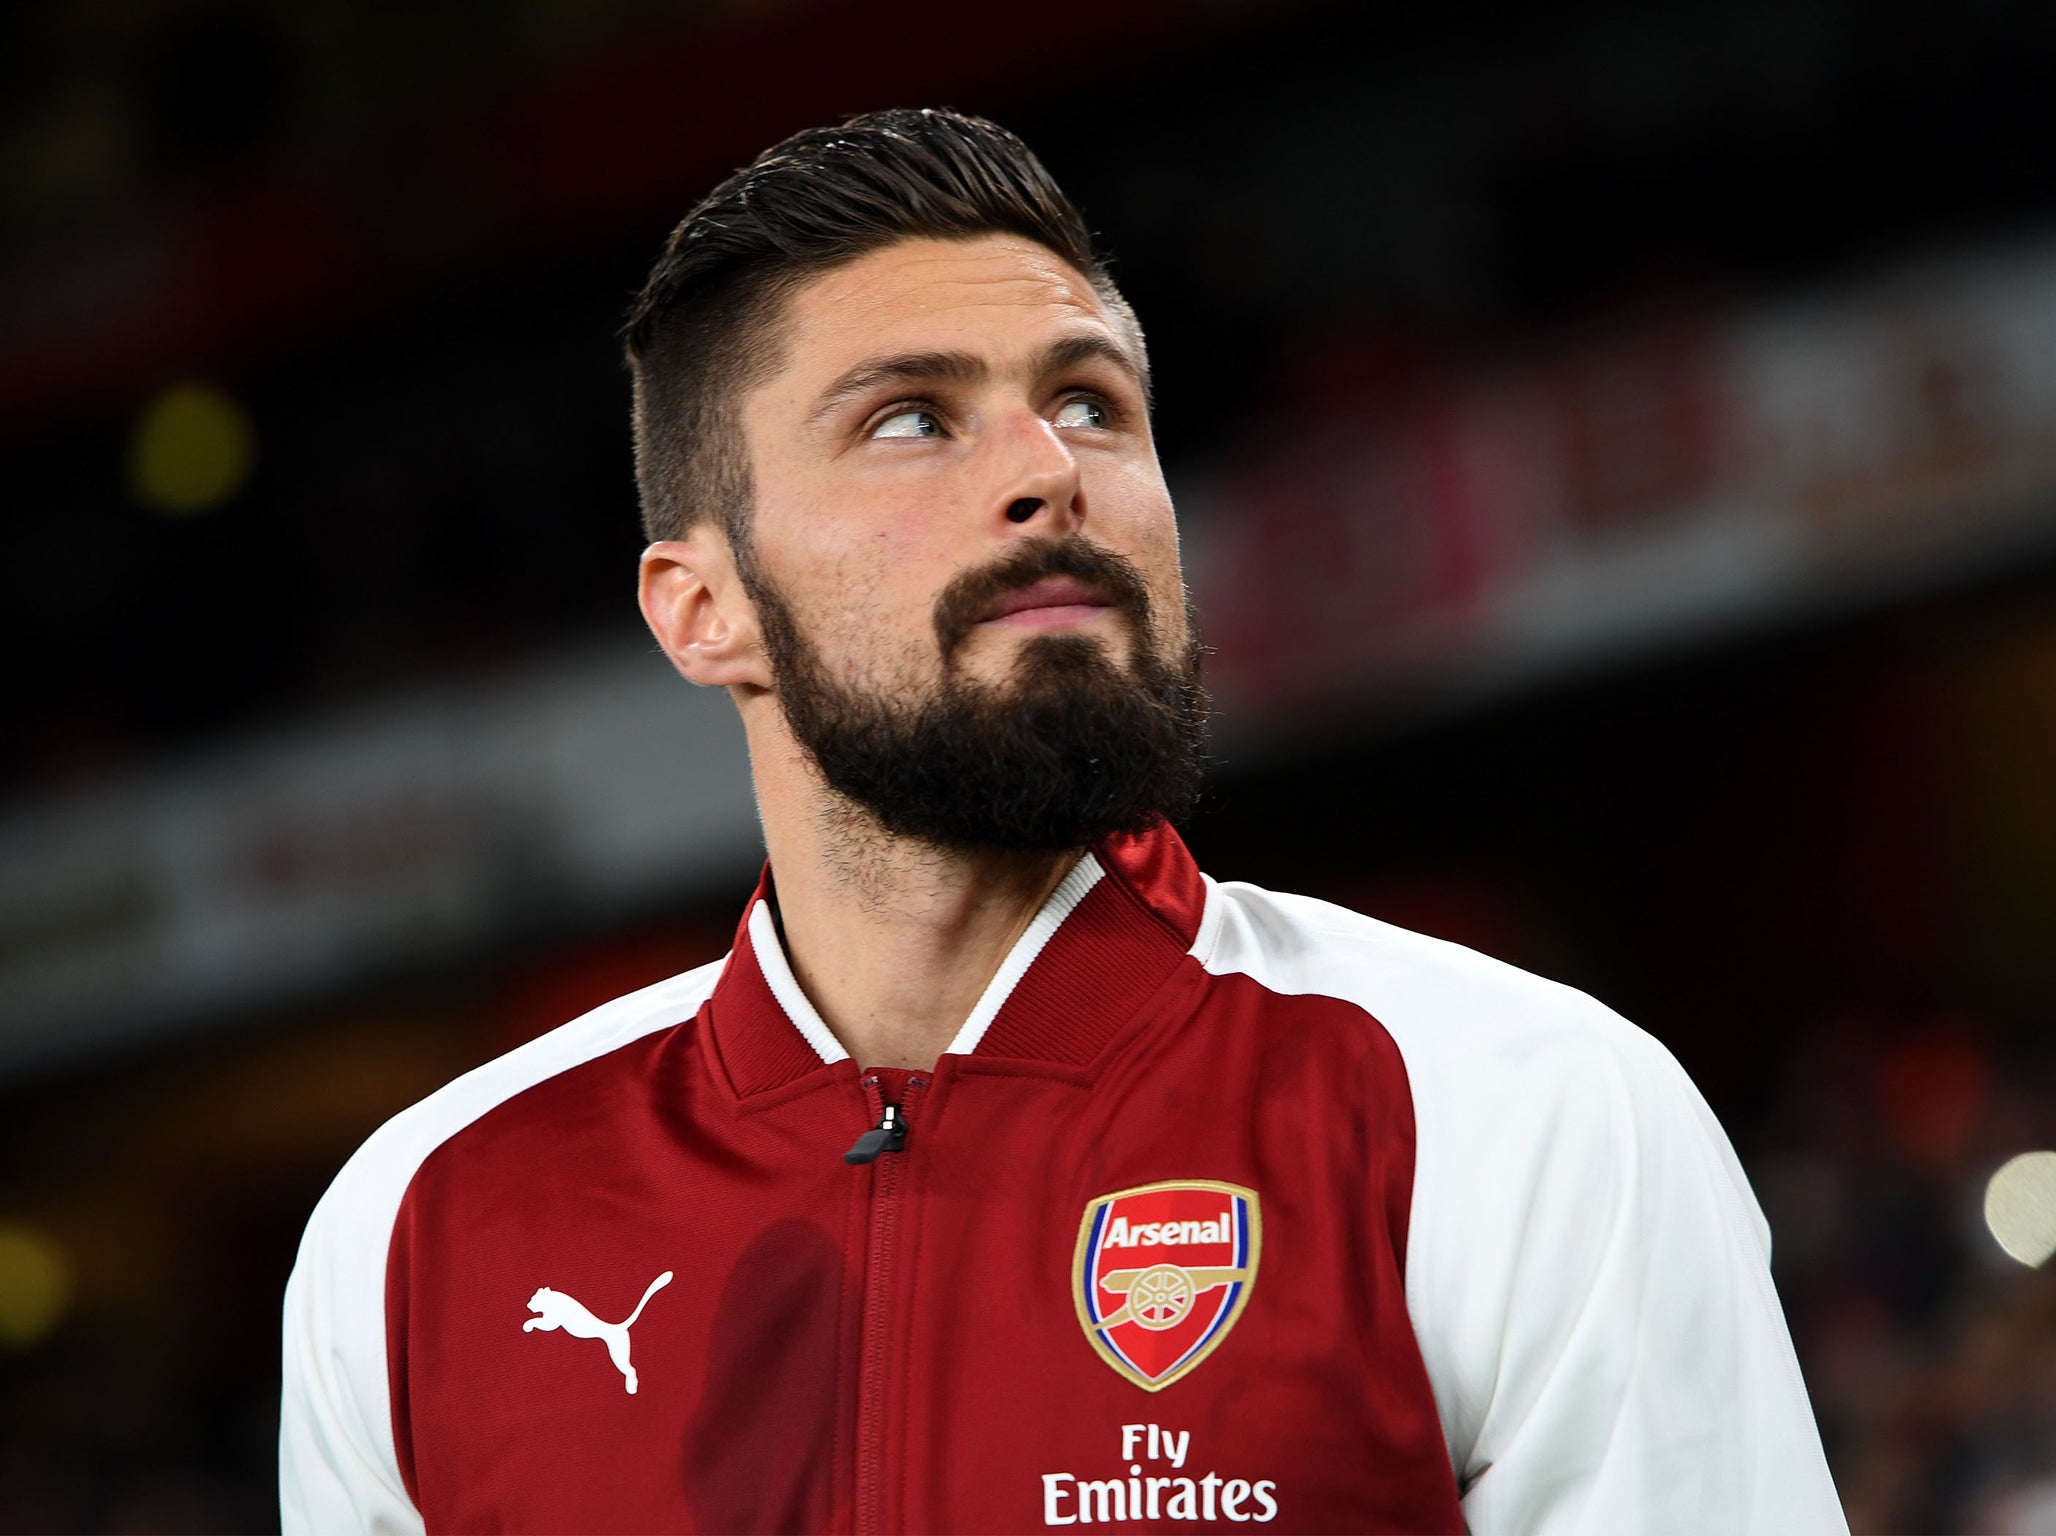 Olivier Giroud could be included in a deal